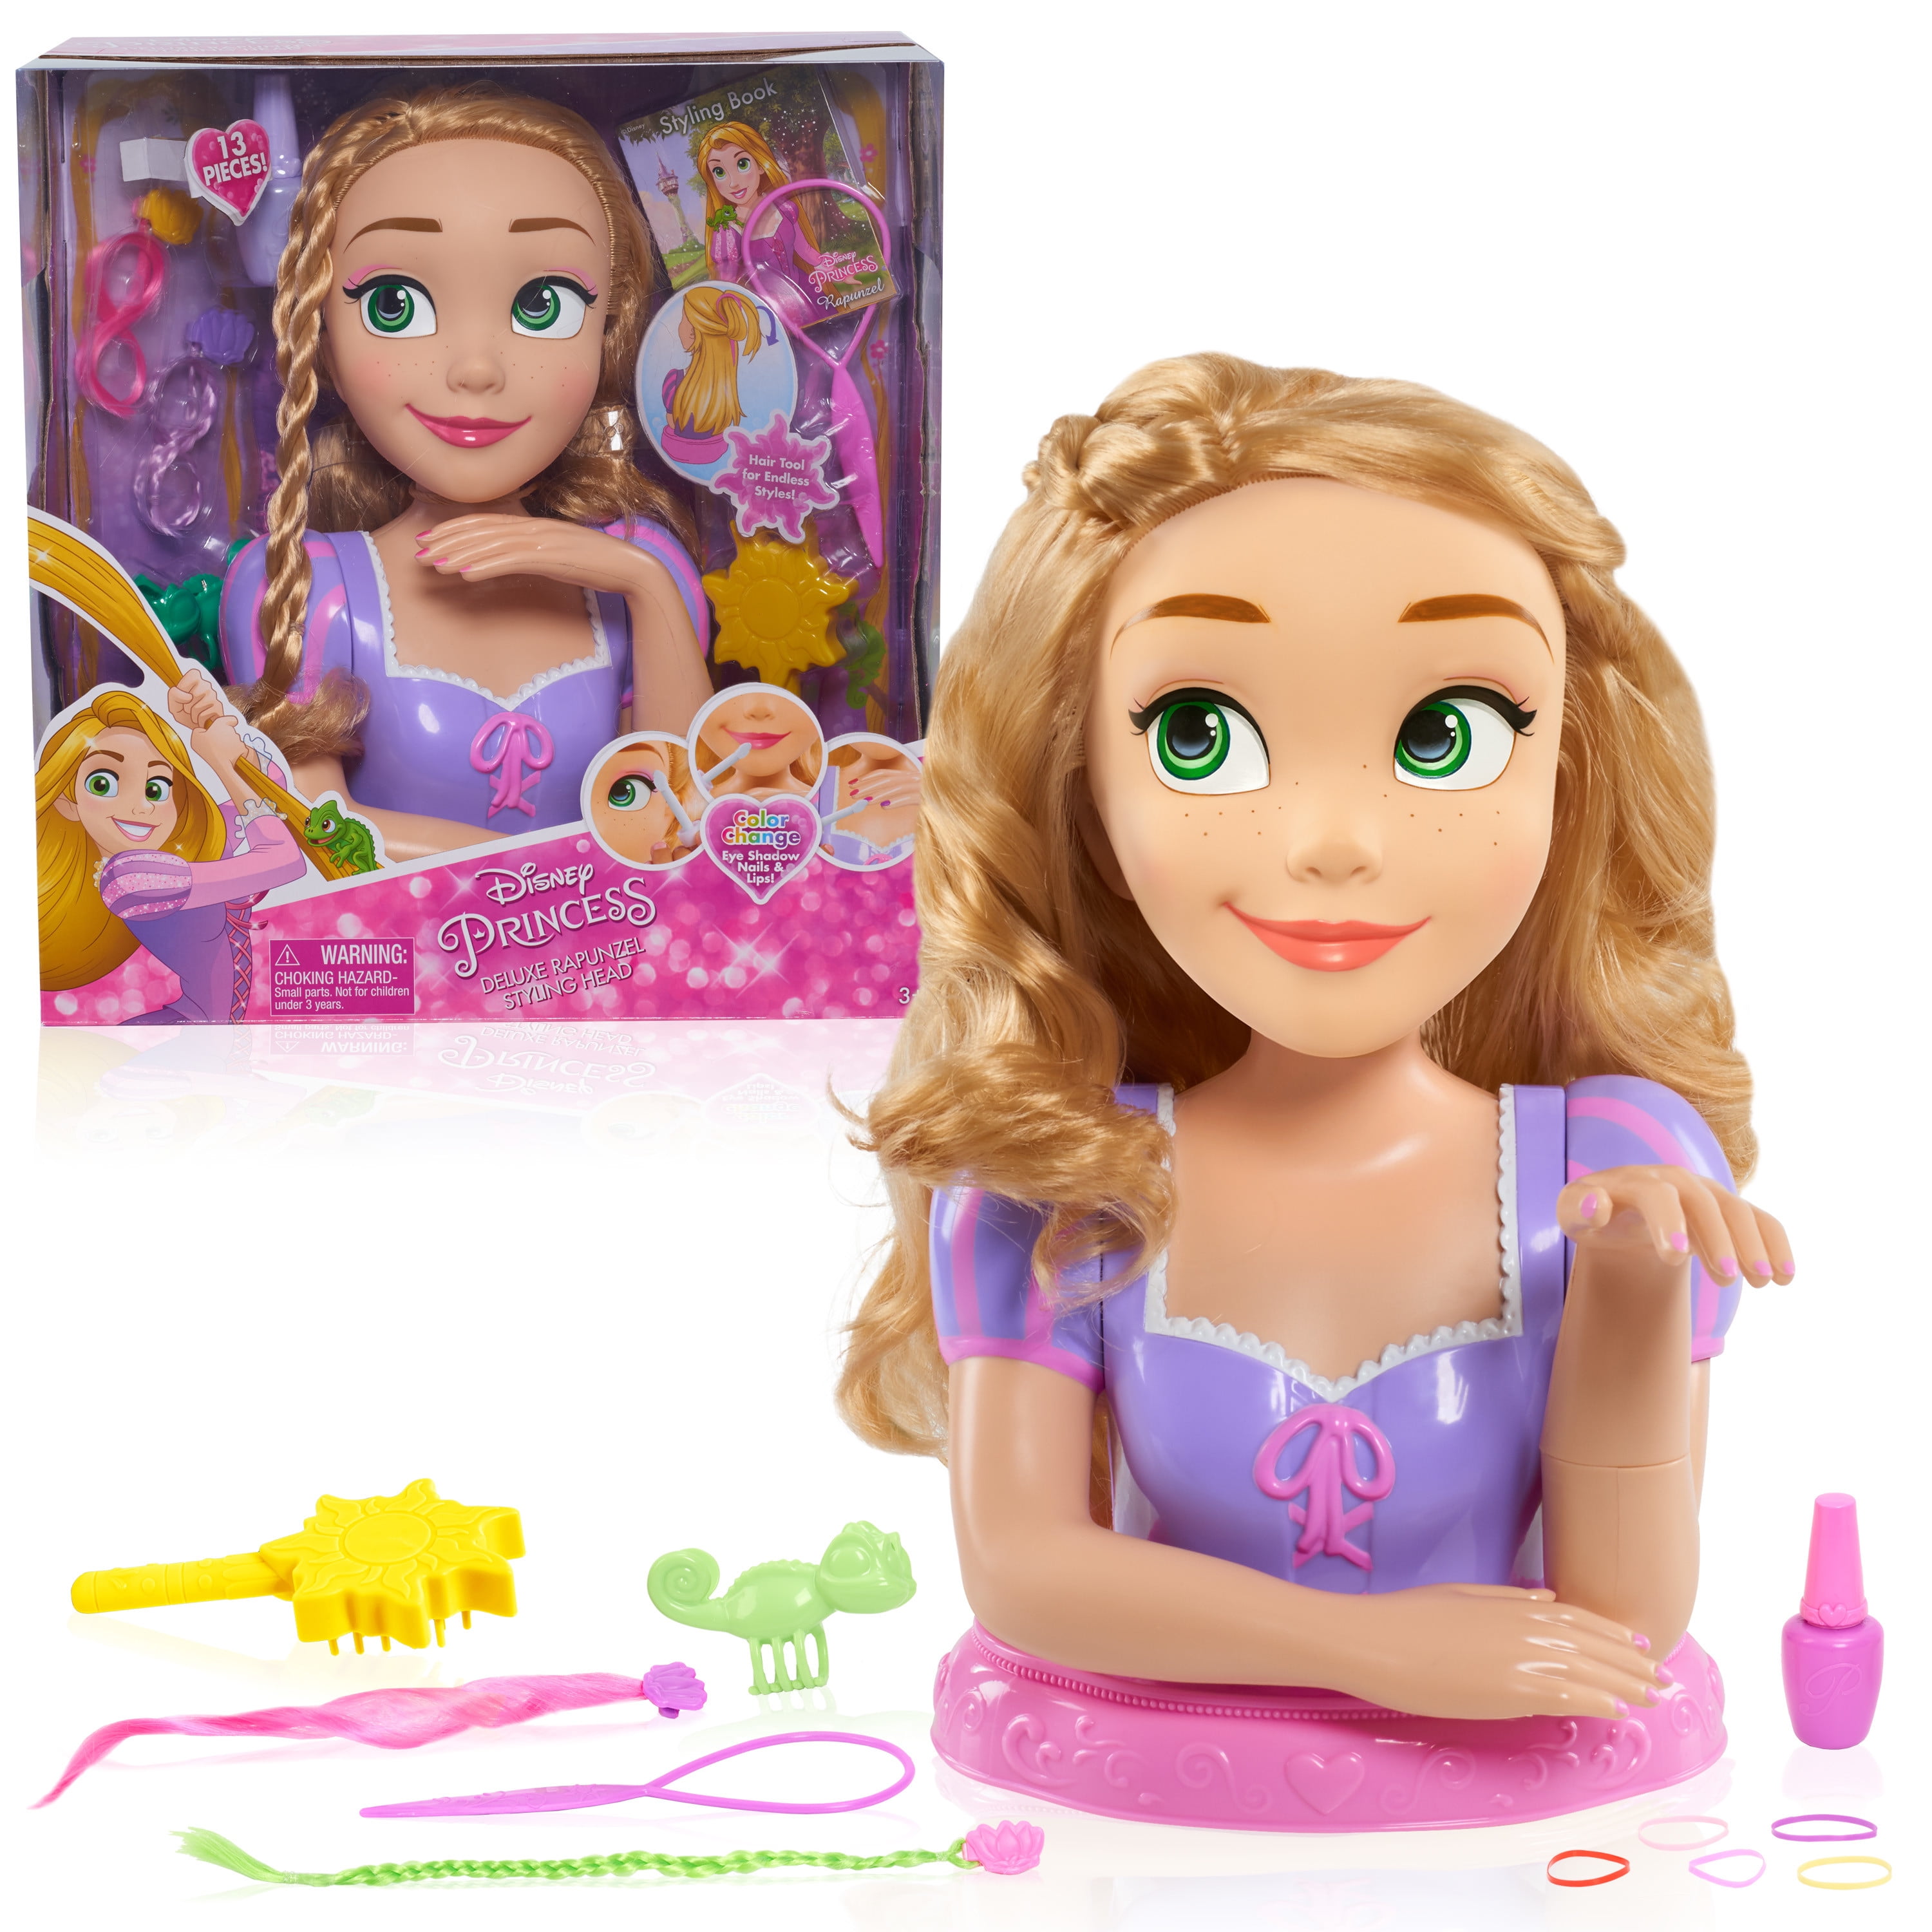 Disney Princess Deluxe Rapunzel Styling Head, 13-pieces, Kids Toys for Ages 3 up